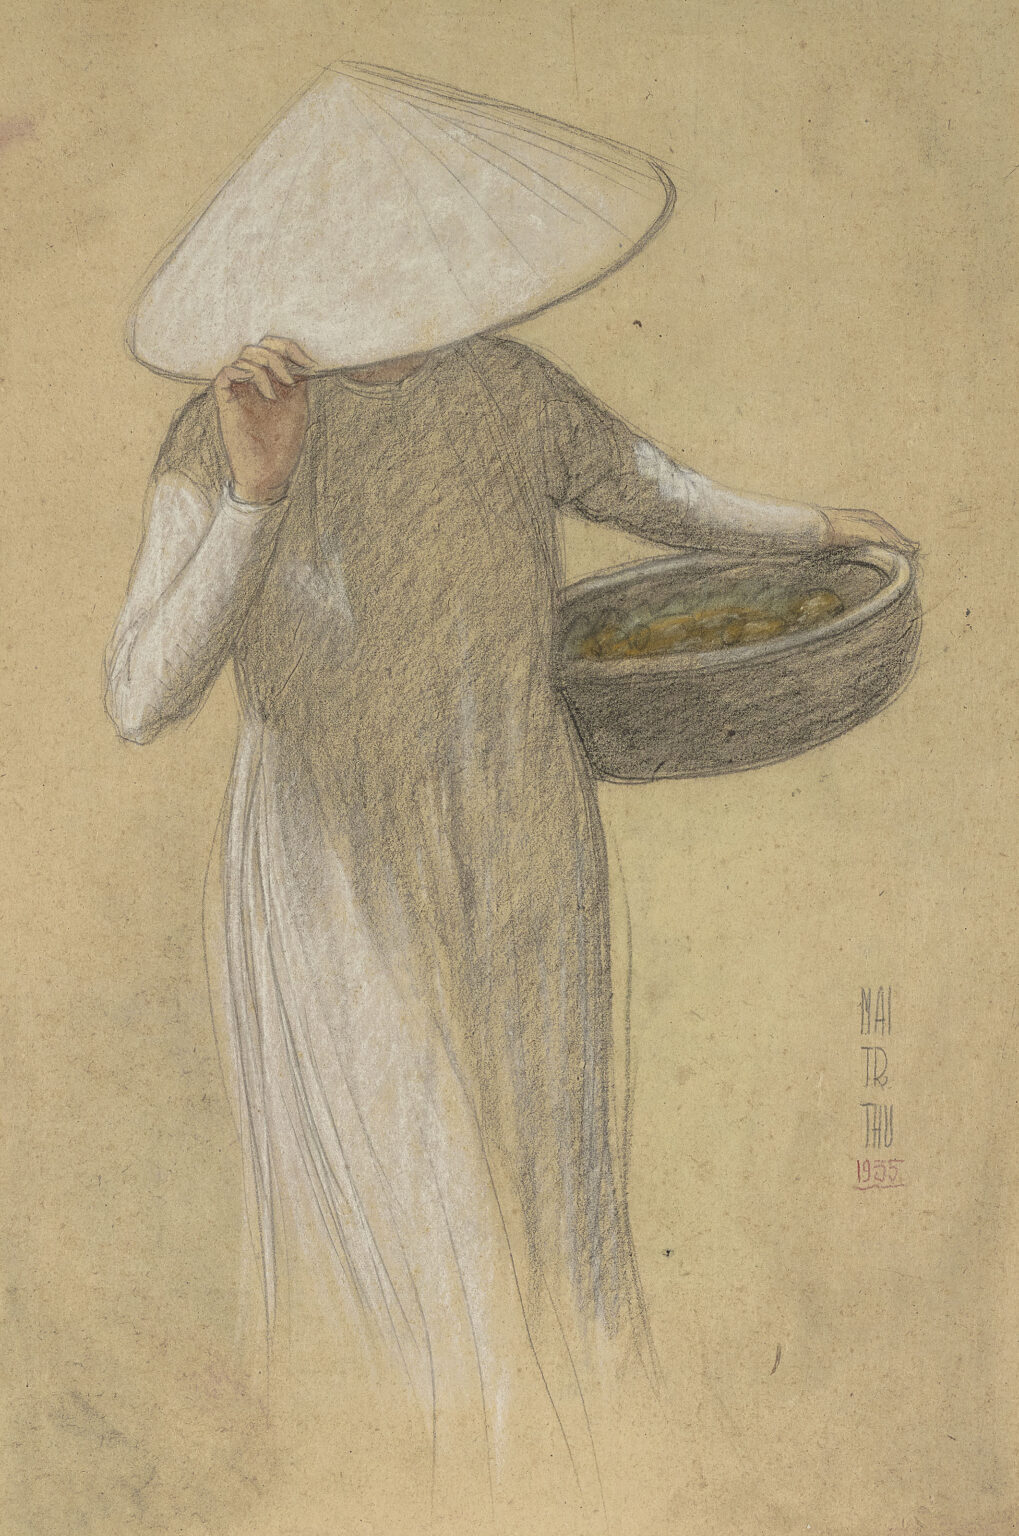 Mai Trung Thu (1906-1980), Retour de la cueillette (Back from Fruit Picking), 1935, pastel, charcoal, and chalk on paper, 58.8 x 38.8 cm. (23 1/8 x 15 1/4 in.)